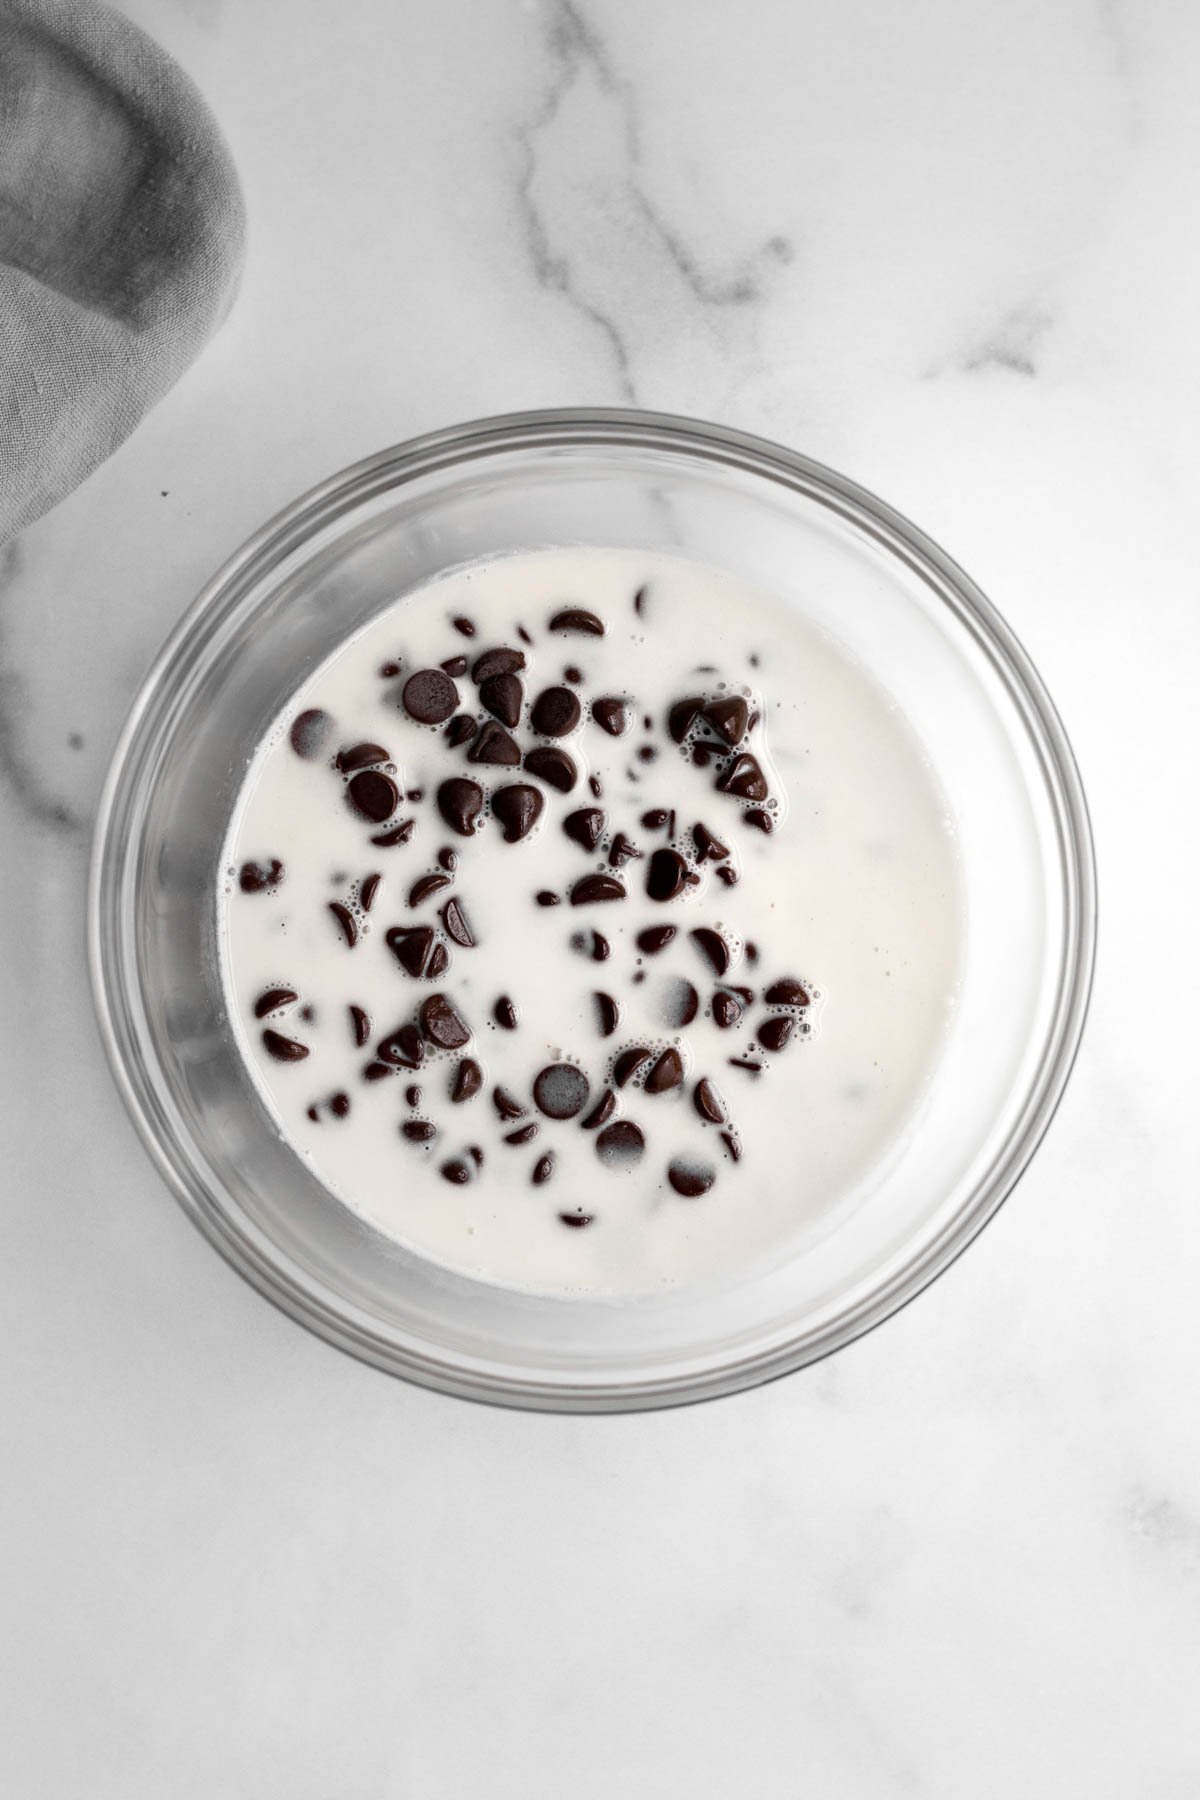 Hot heavy cream is added to the chocolate chips.